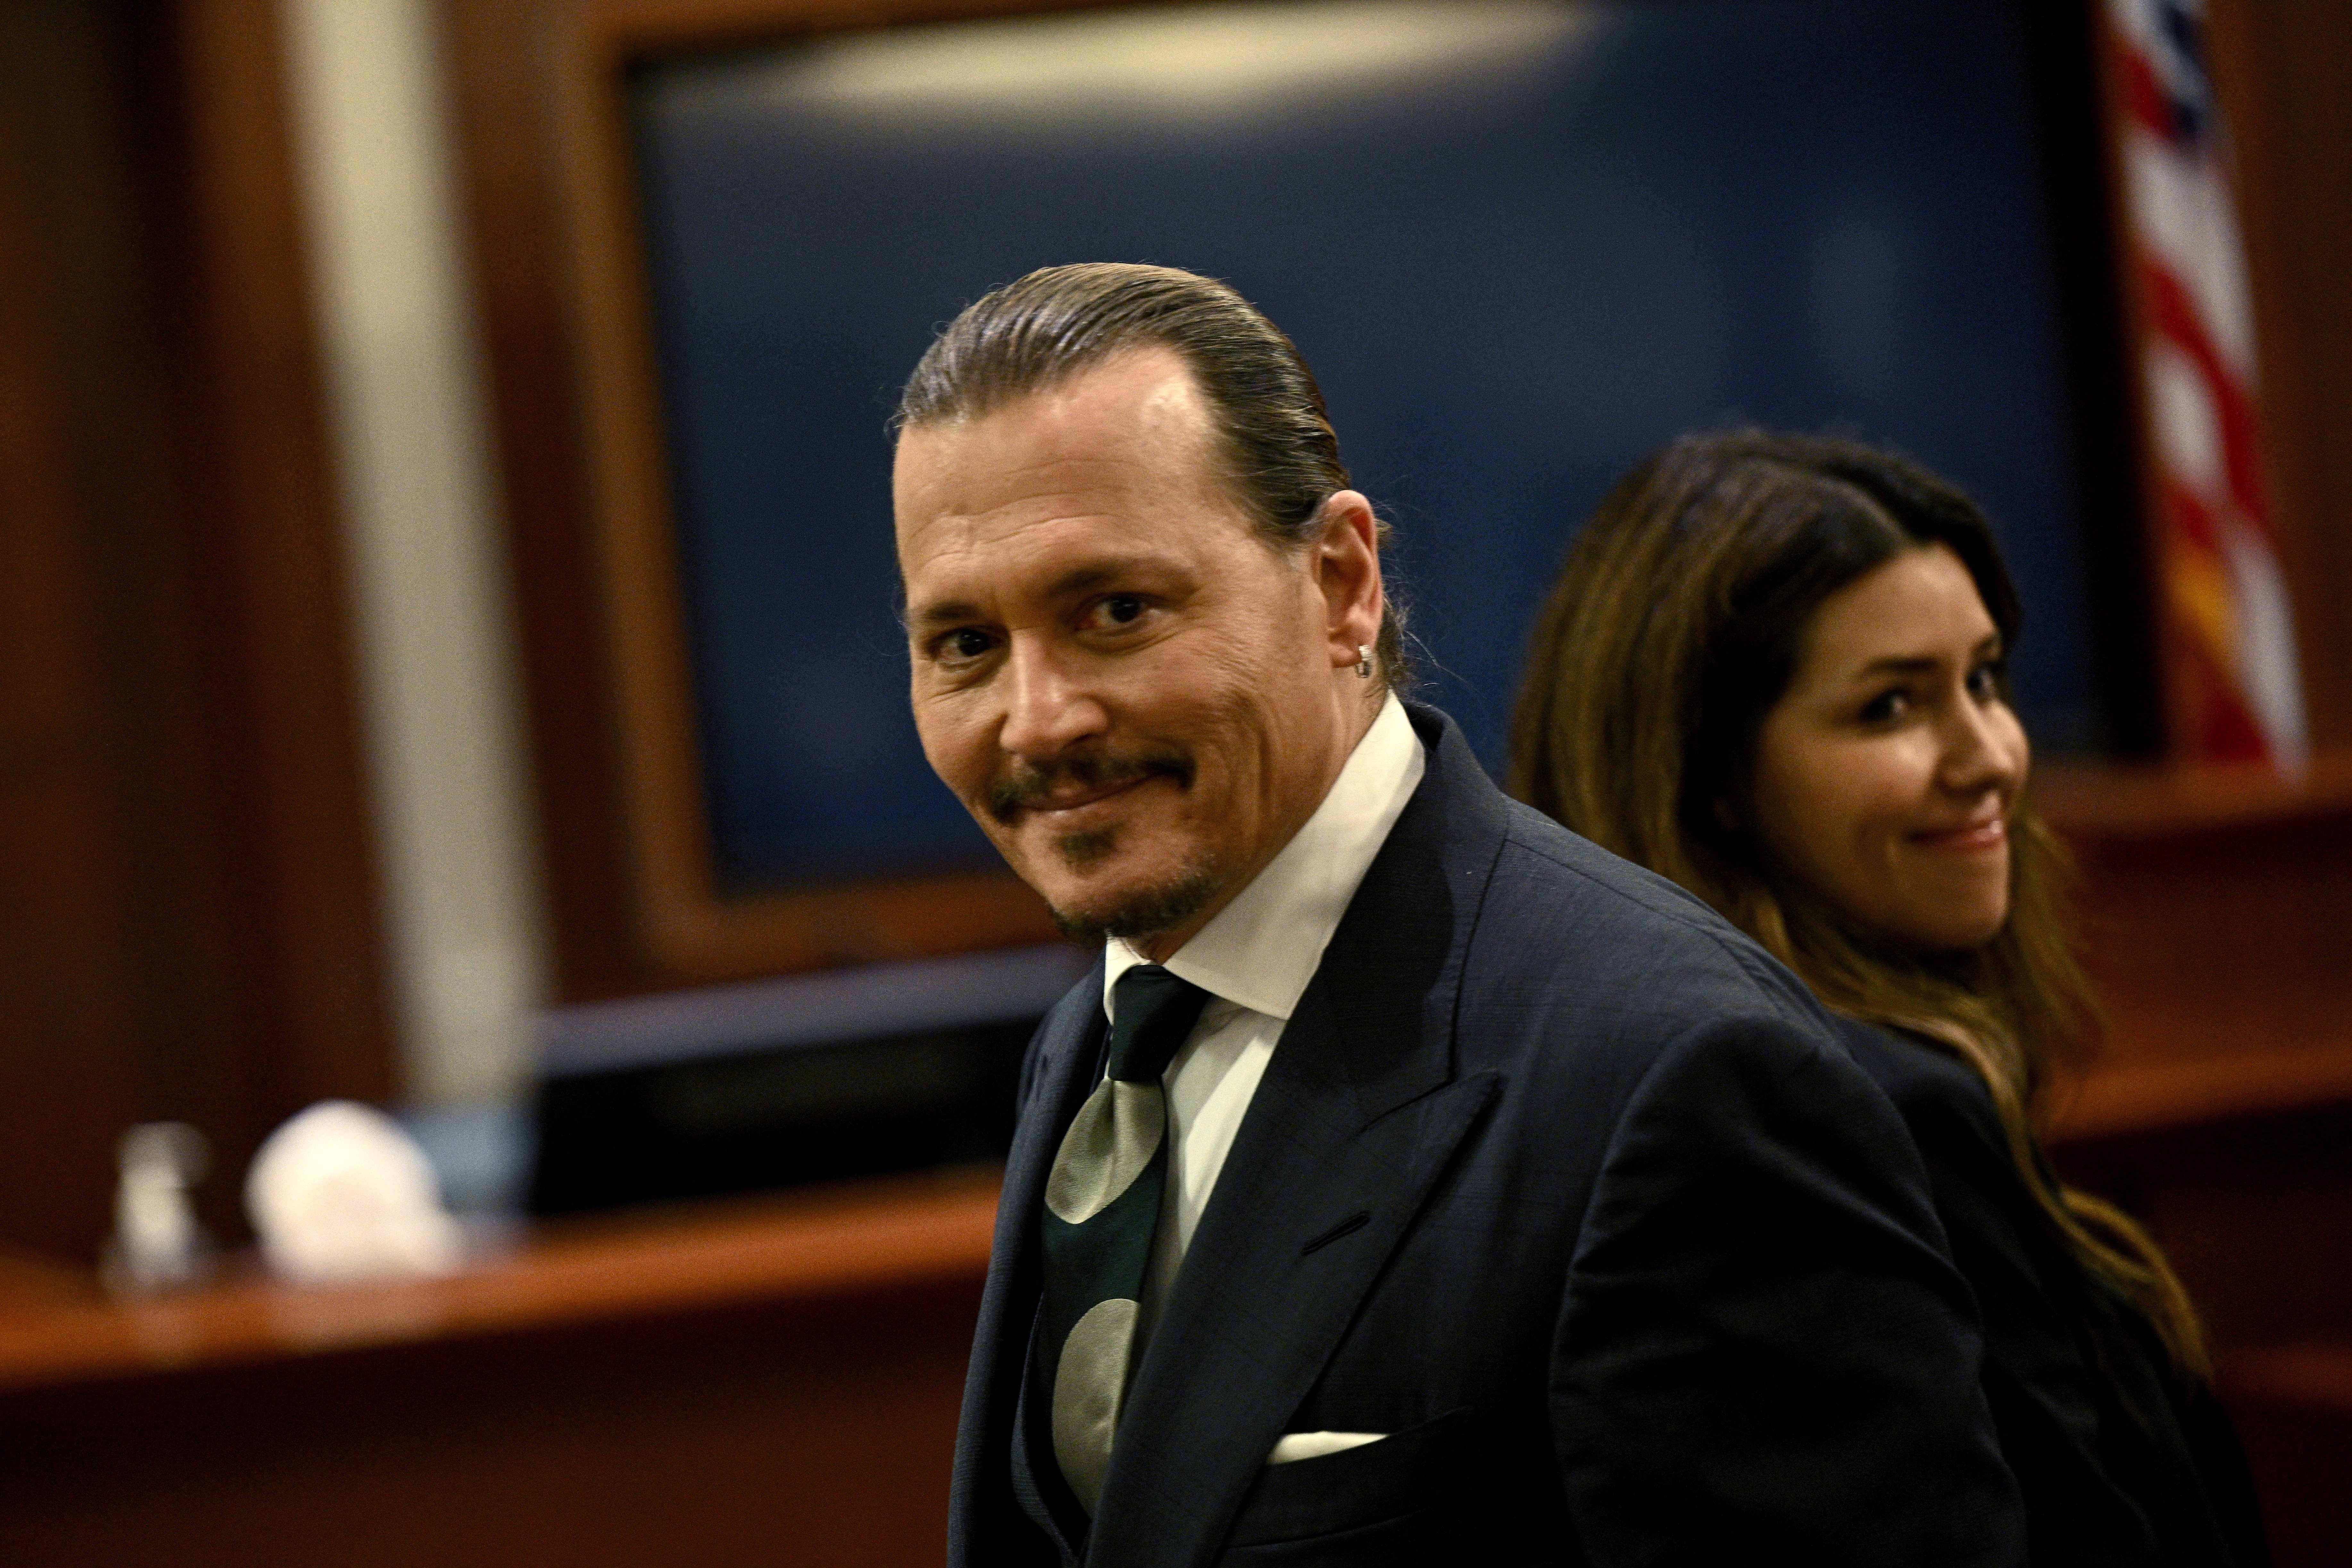 Johnny Depp and Atty. Camille Vasquez in the courtroom at the Fairfax County Circuit Courthouse in Fairfax, Virginia, on April 26, 2022. | Source: Getty Images